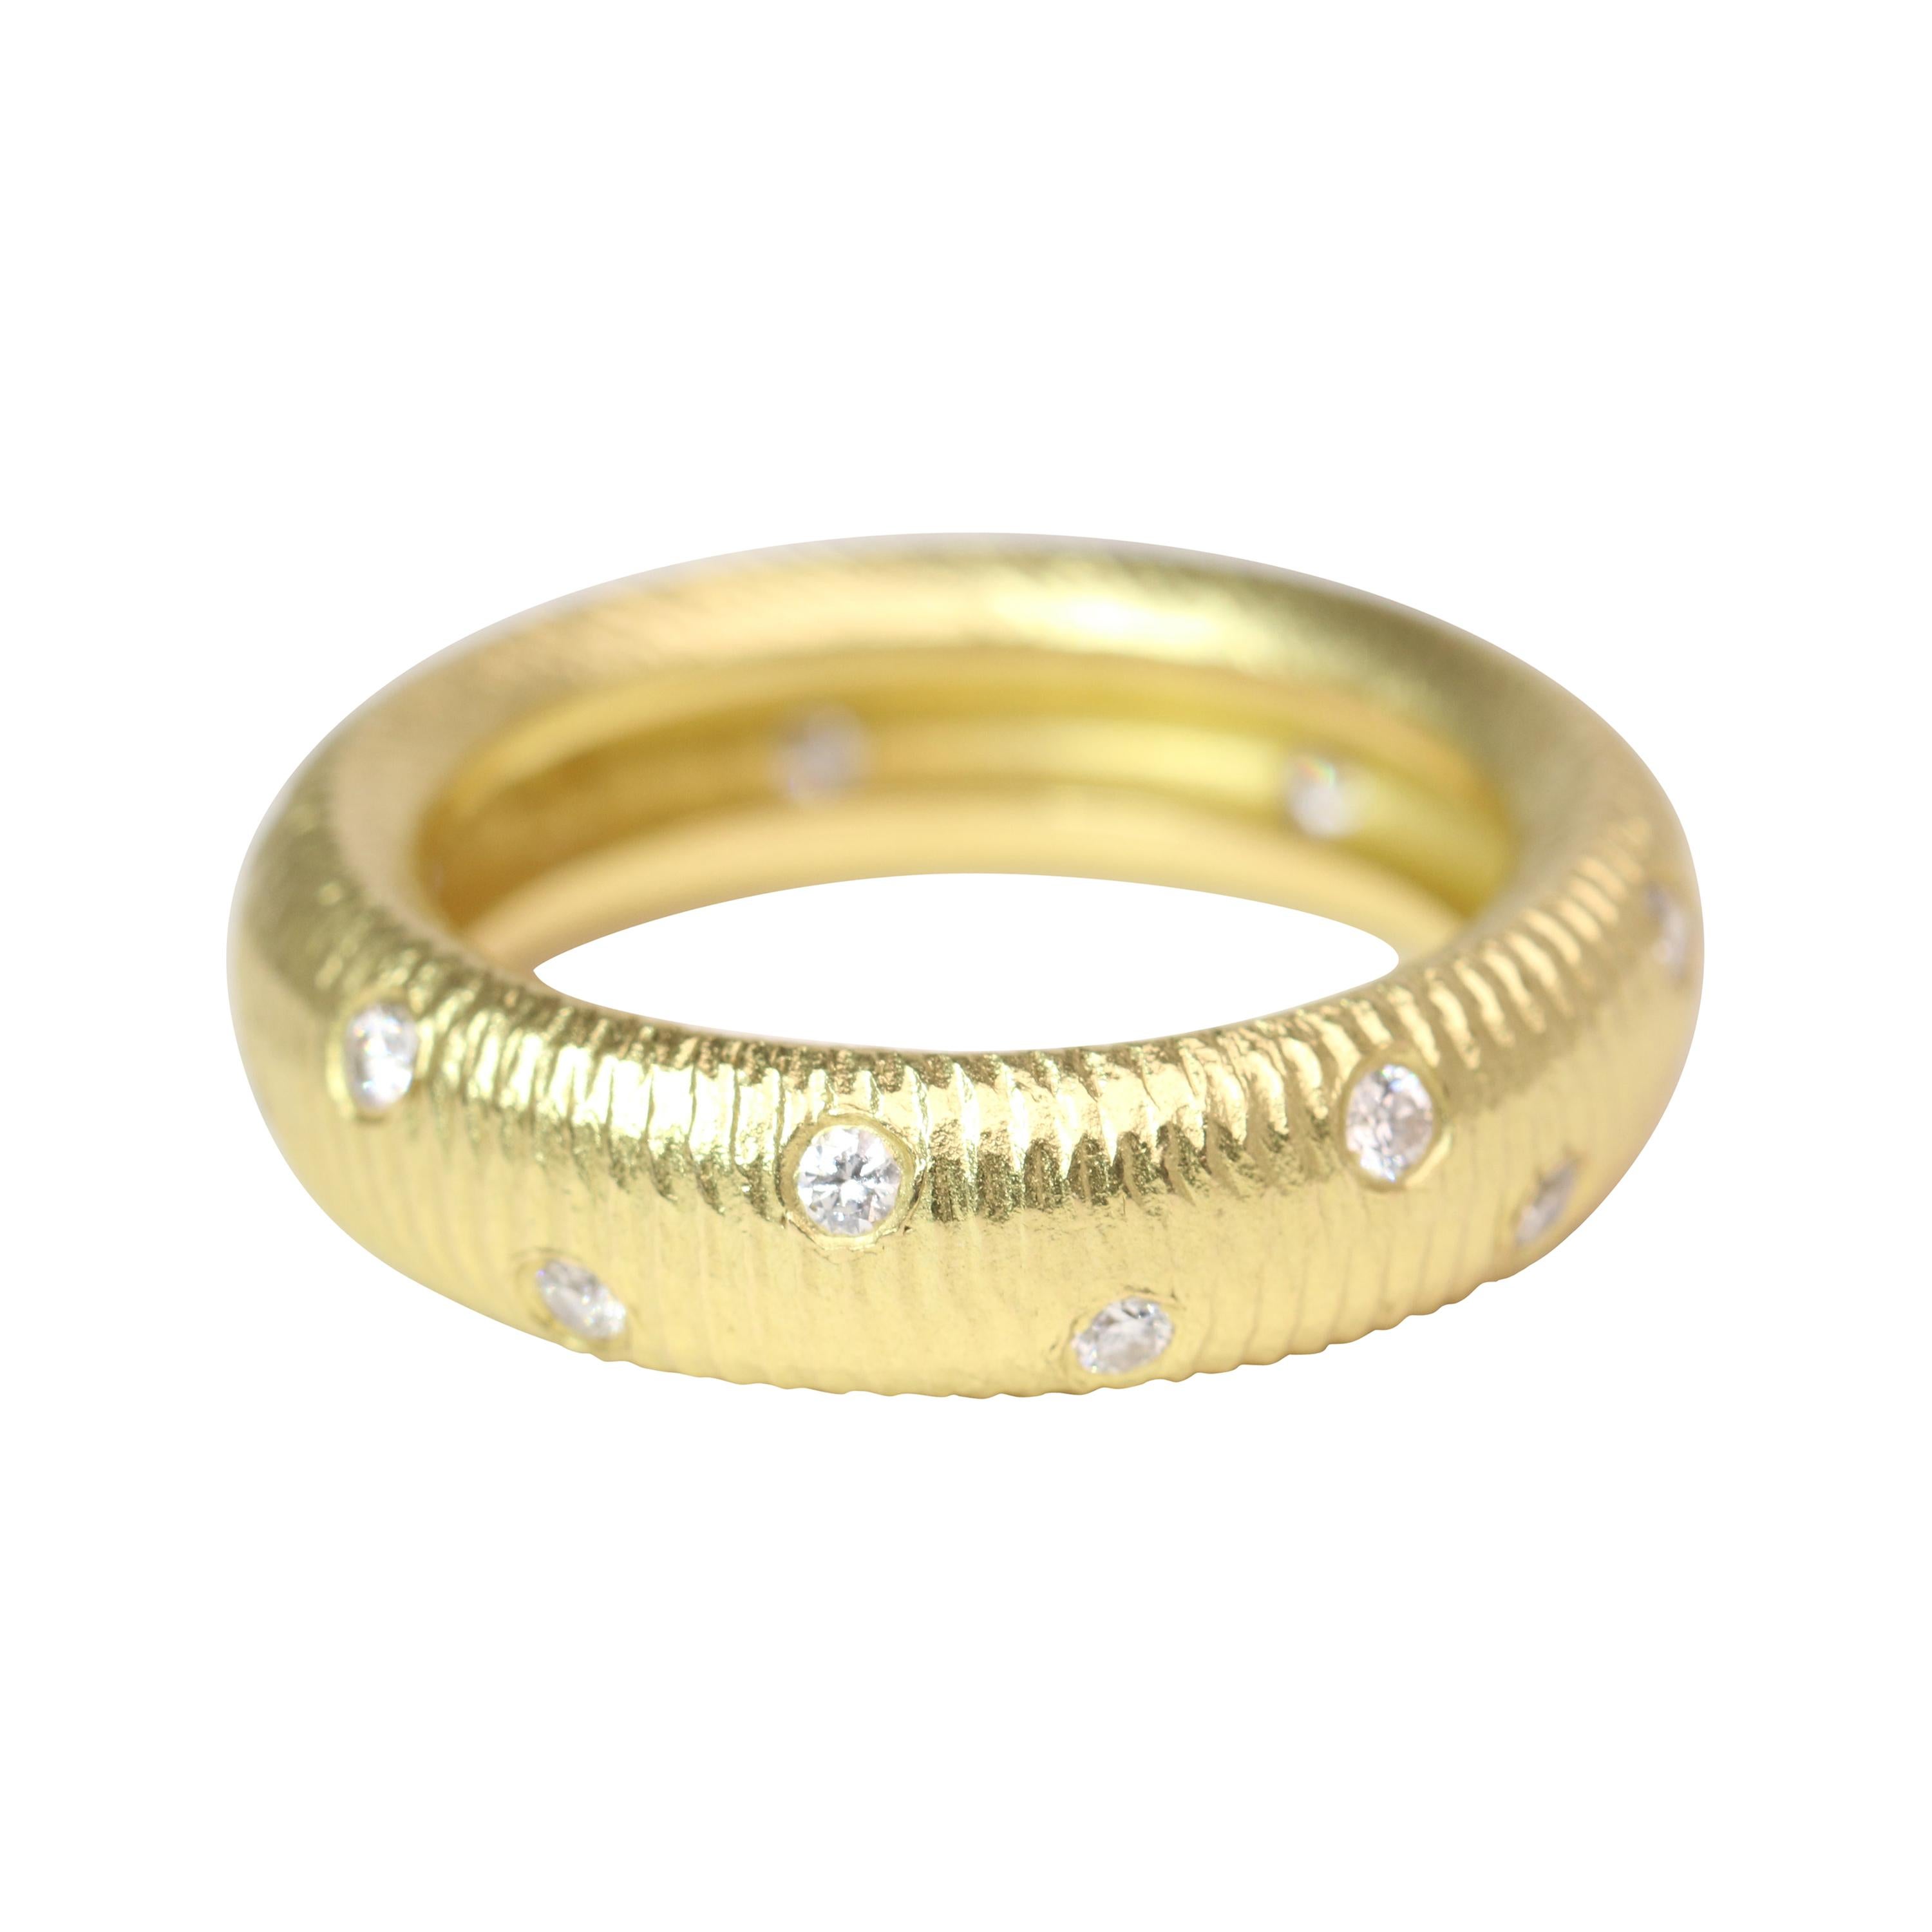 Paul Morelli 18k Yellow Gold Band with Diamonds For Sale